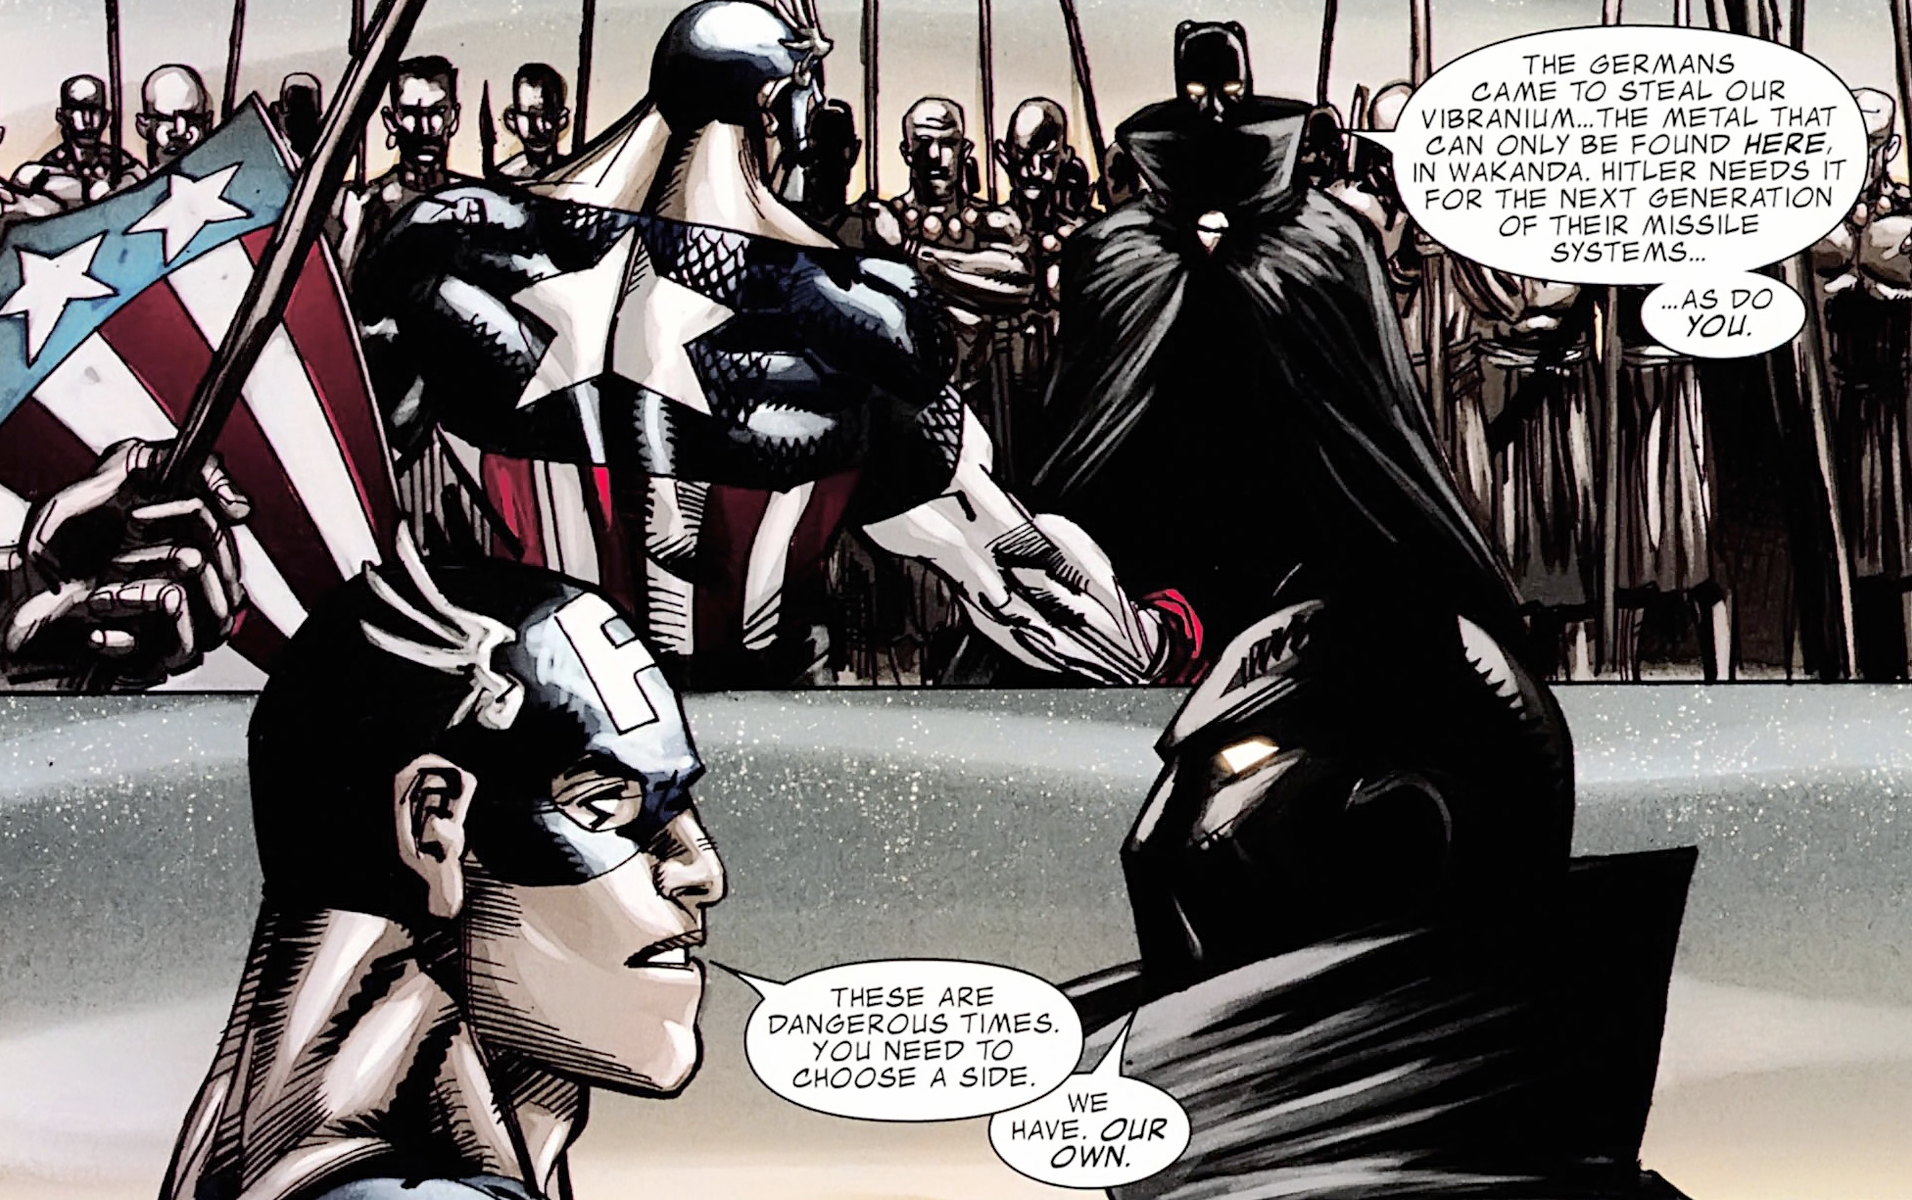 Captain America makes a plea to the King of Wakanda in Black Panther/Captain America: Flags of Our Fathers Vol. 1 #1 "Part I" (2010), Marvel Comics. WOrds by Reginald Hudlin, art by Denys Cowan, Klaus Janson, Pete Pantazis, and Joe Sabino.